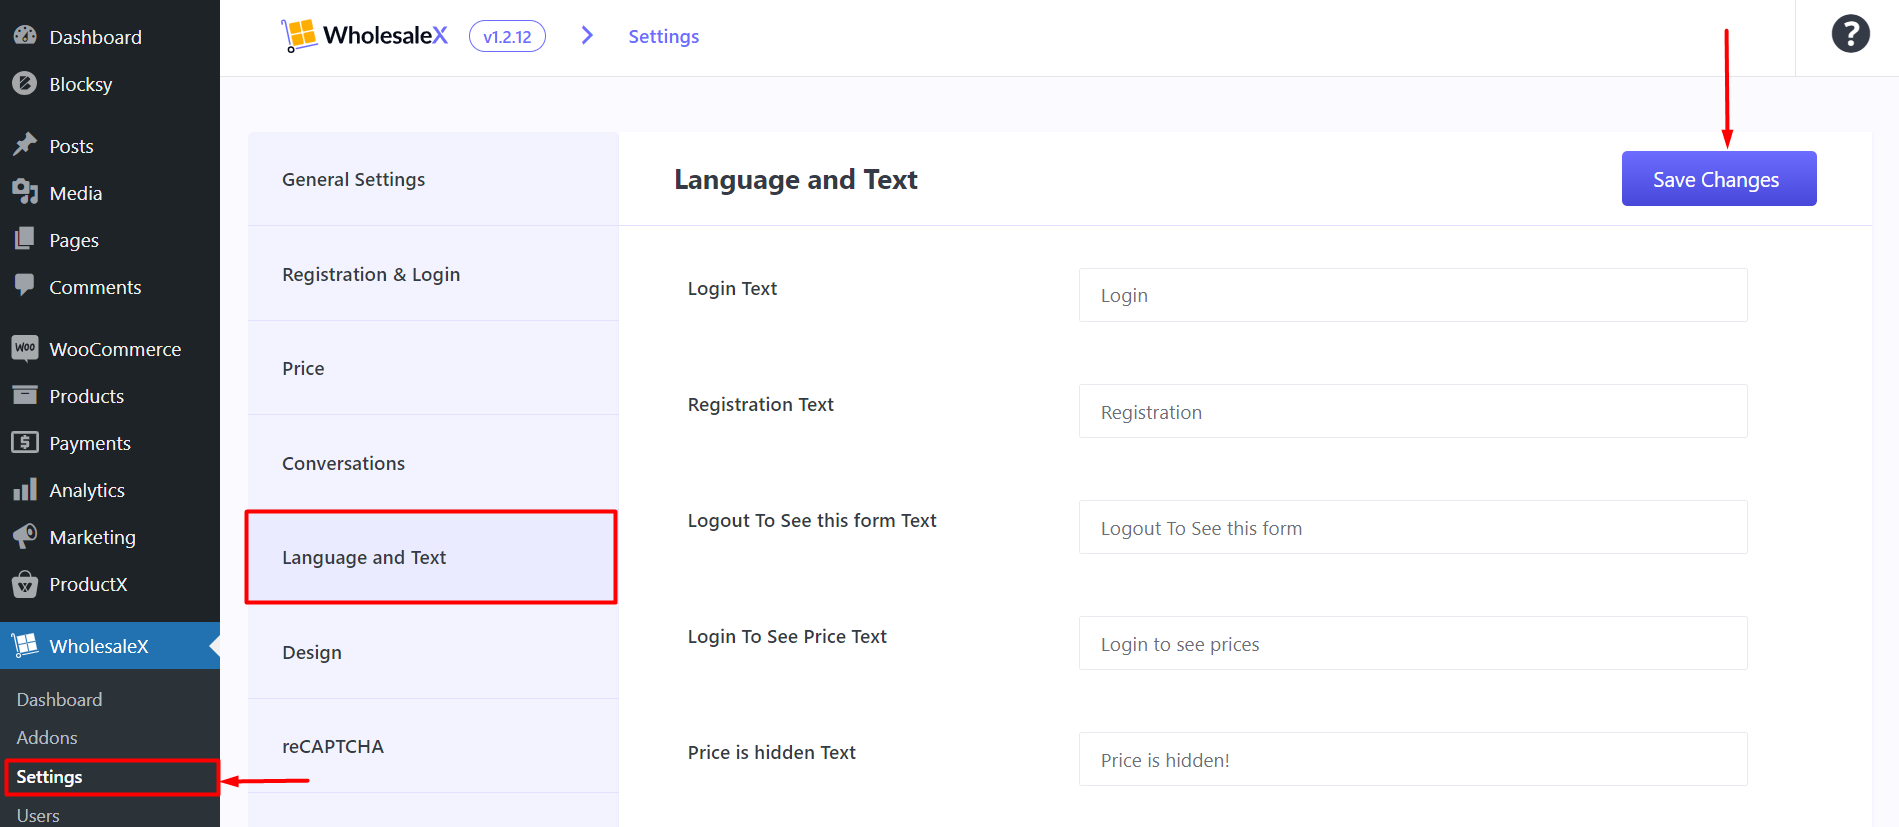 Language and Text Settings for WholesaleX